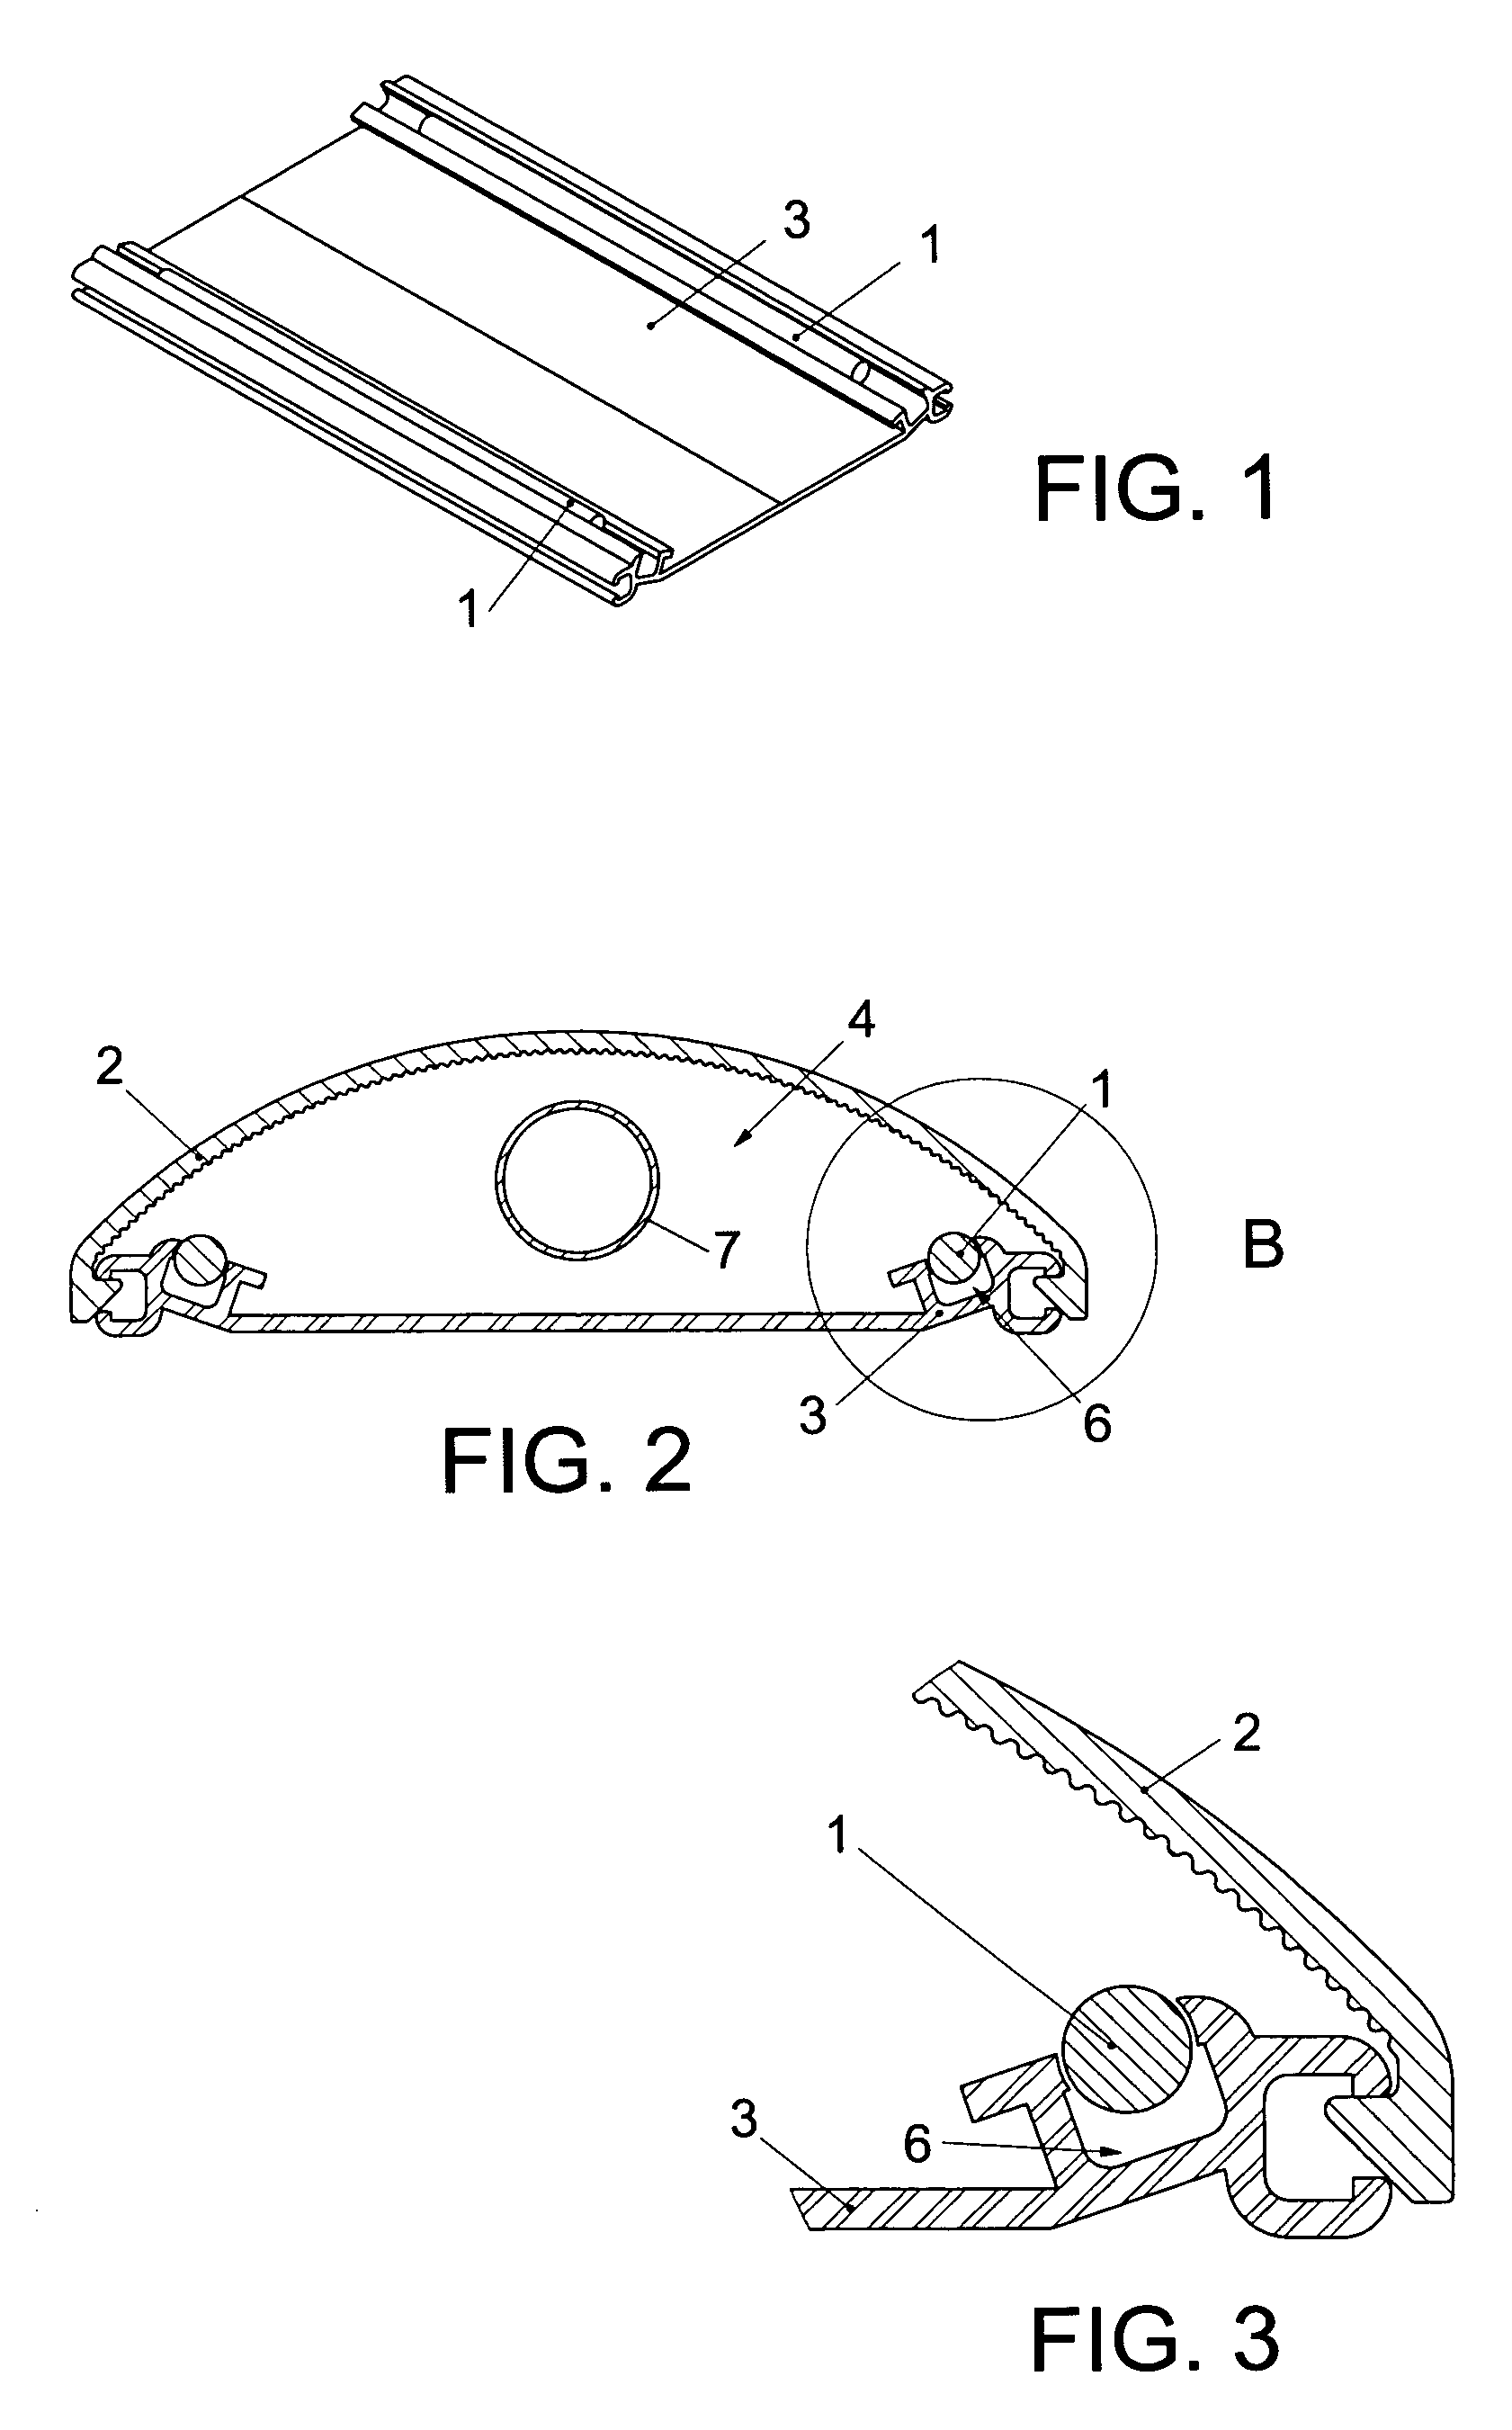 Arrangement in connection with a lighting fixture, and a lighting fixture